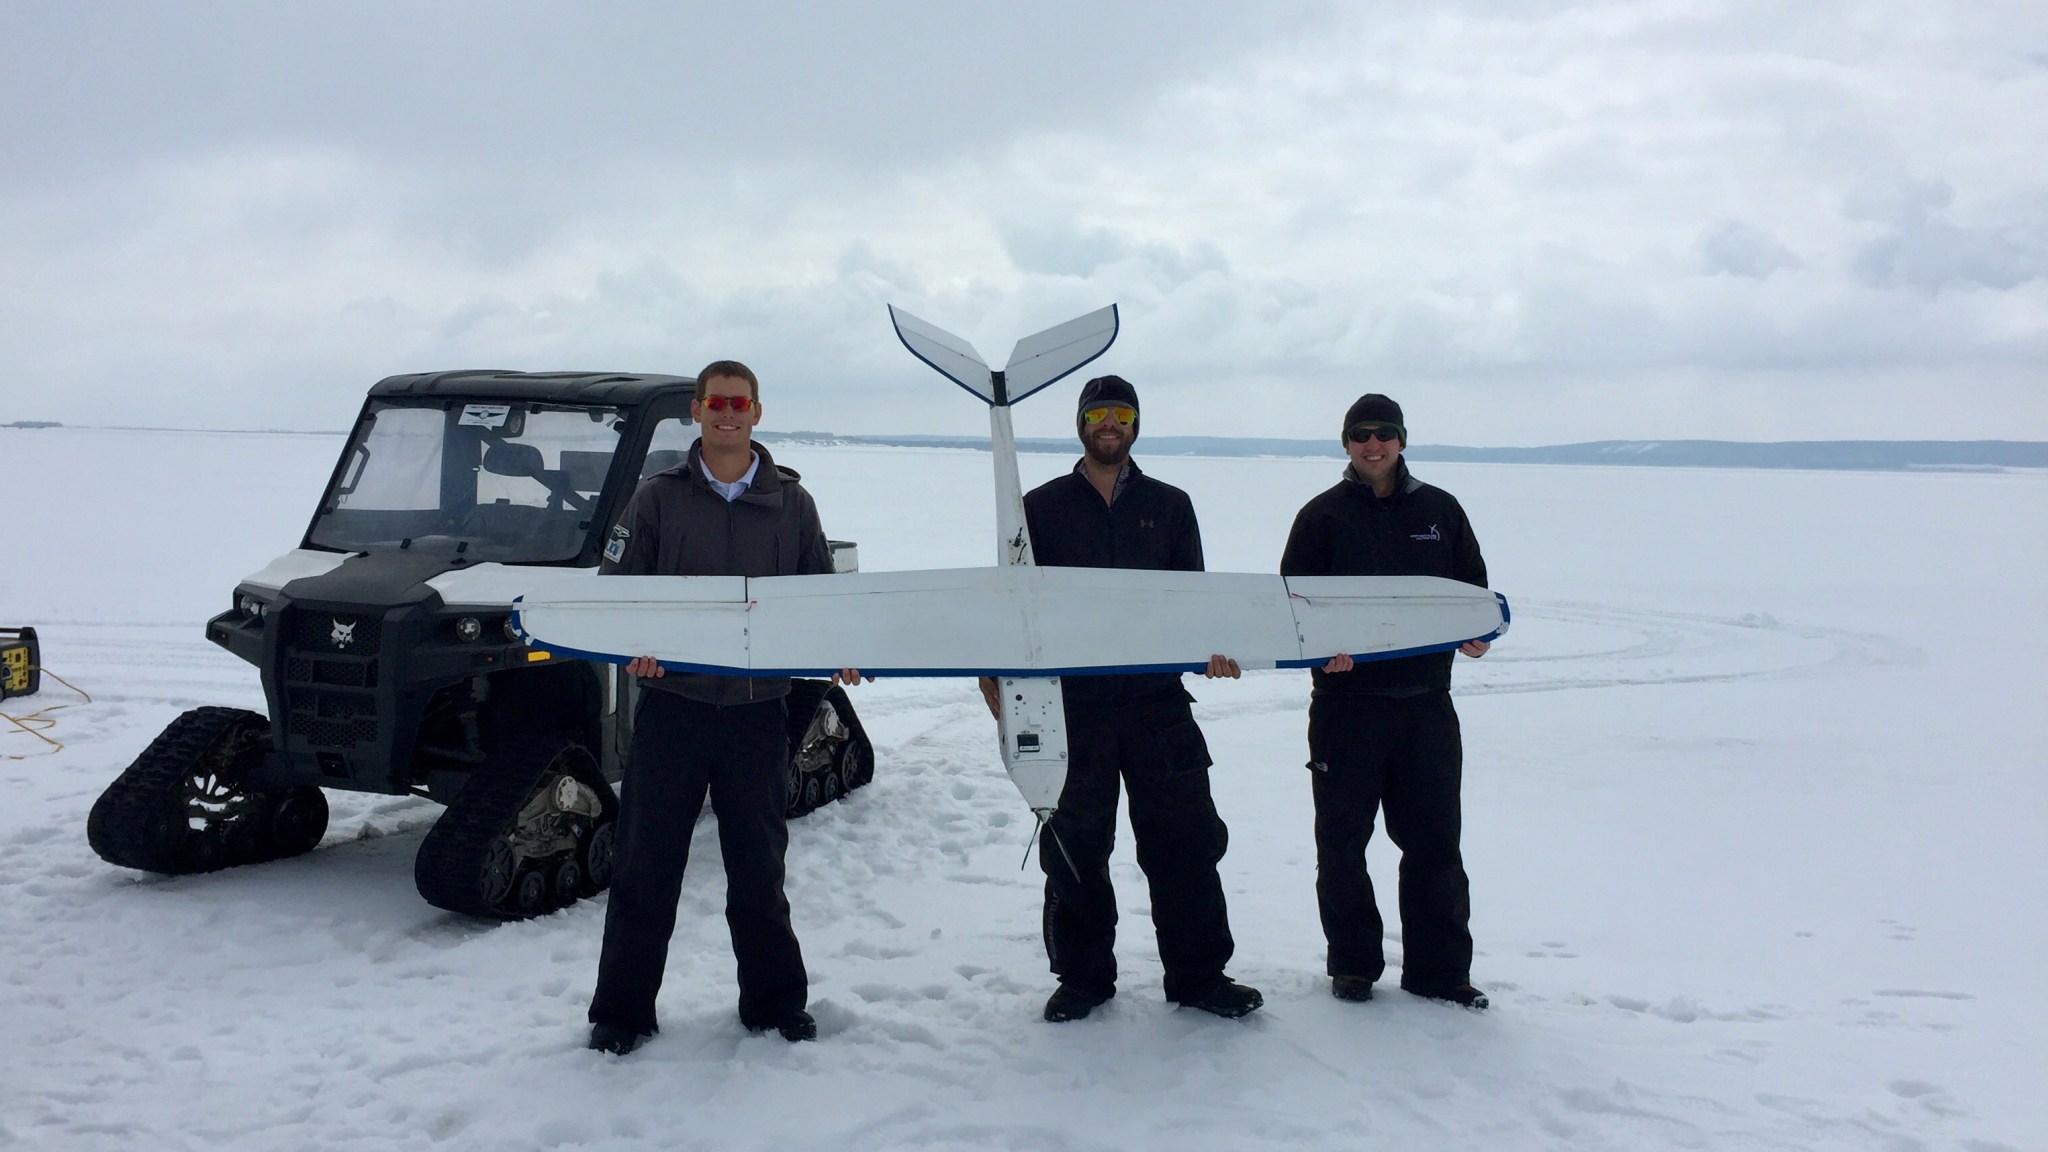 Three people in winter clothes hold a white fixed-wing drone while standing in a snow-covered landscape with a vehicle behind.